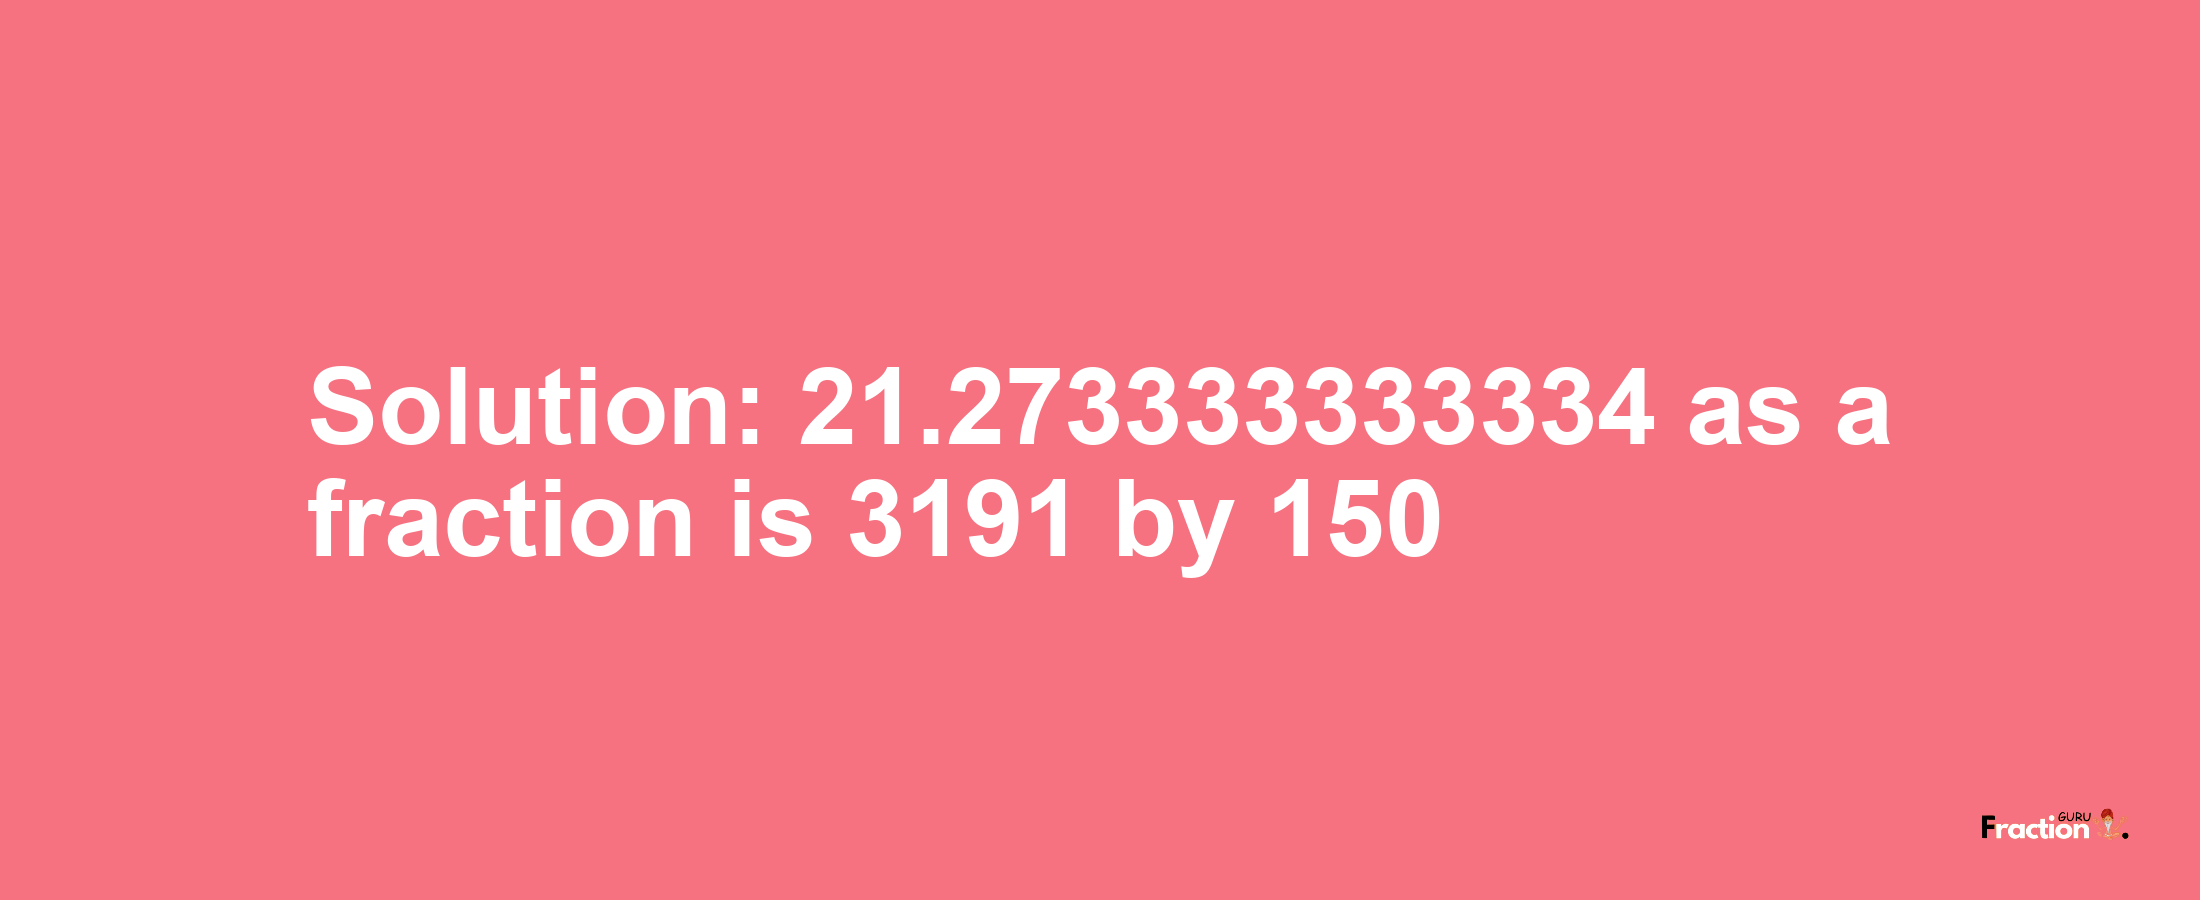 Solution:21.273333333334 as a fraction is 3191/150